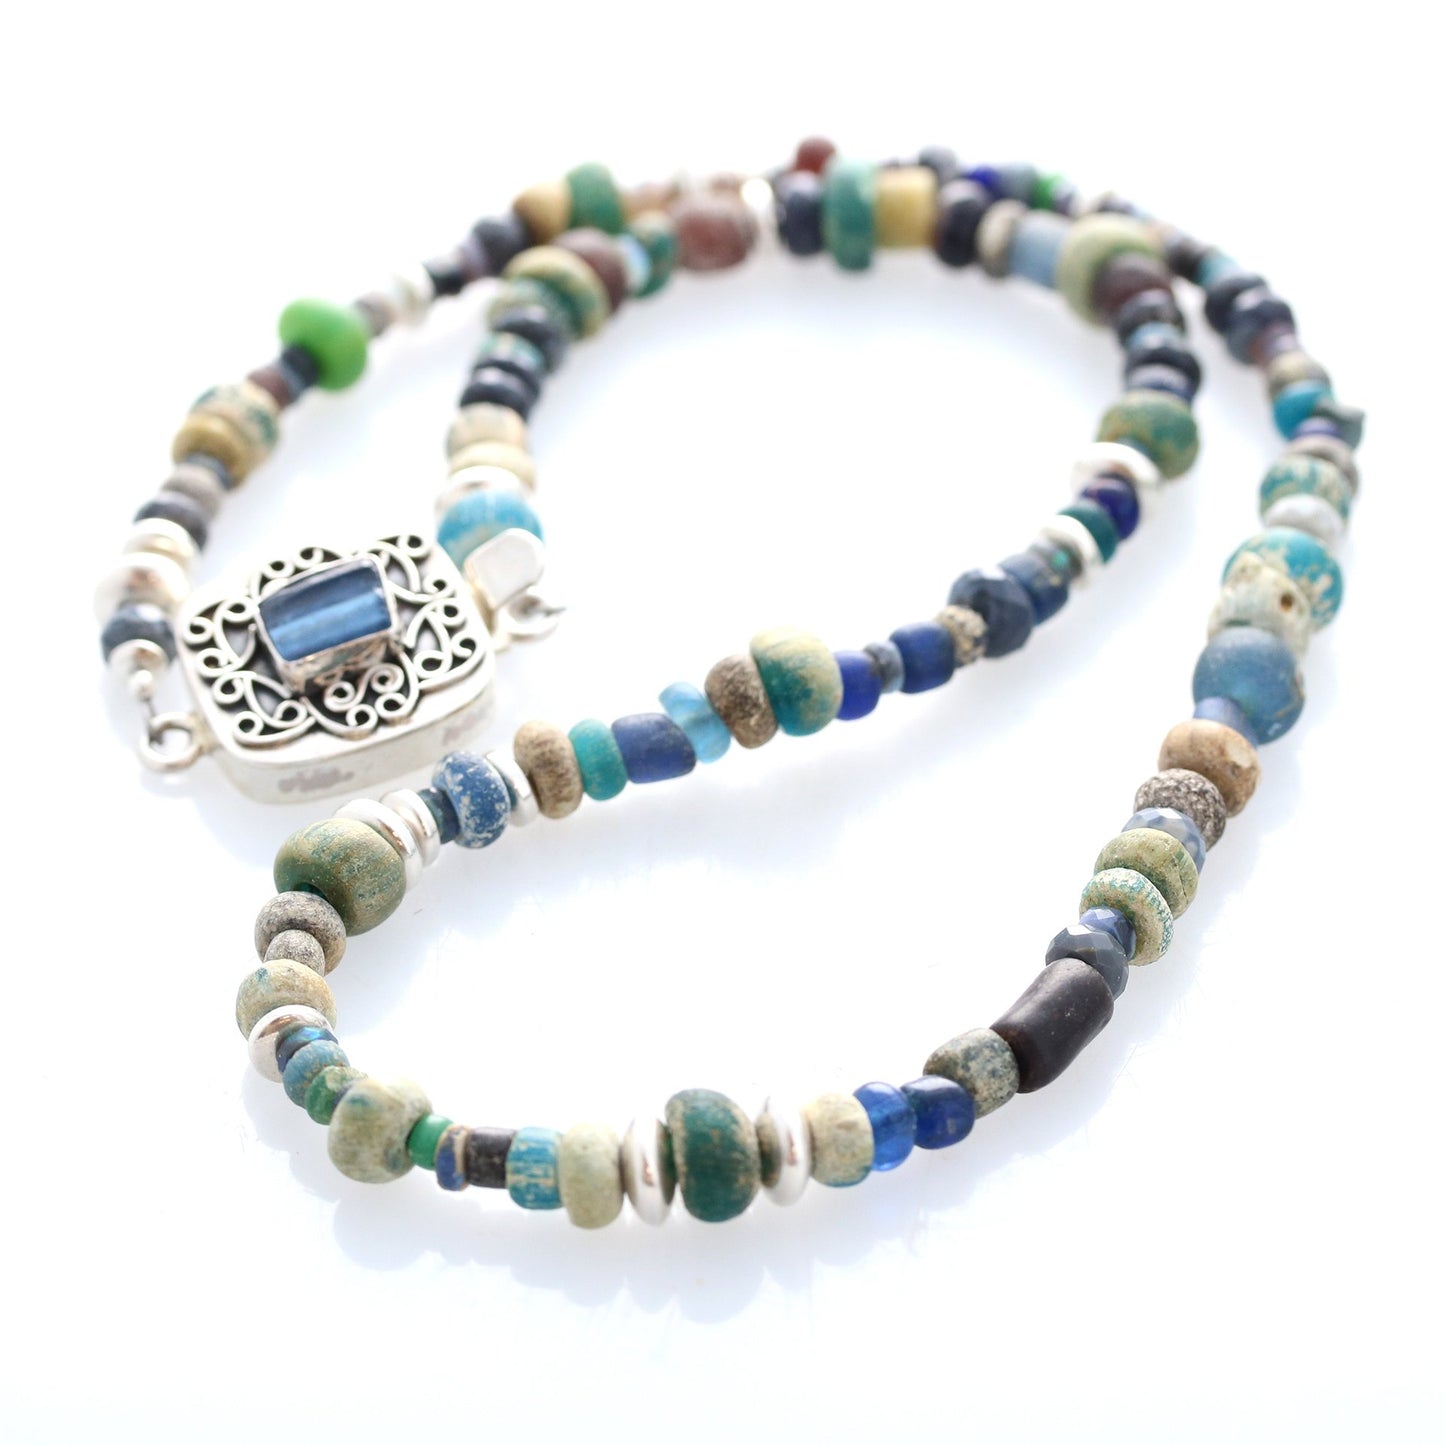 Ancient Mali Dig Beads Necklace Sterling And Black Opals